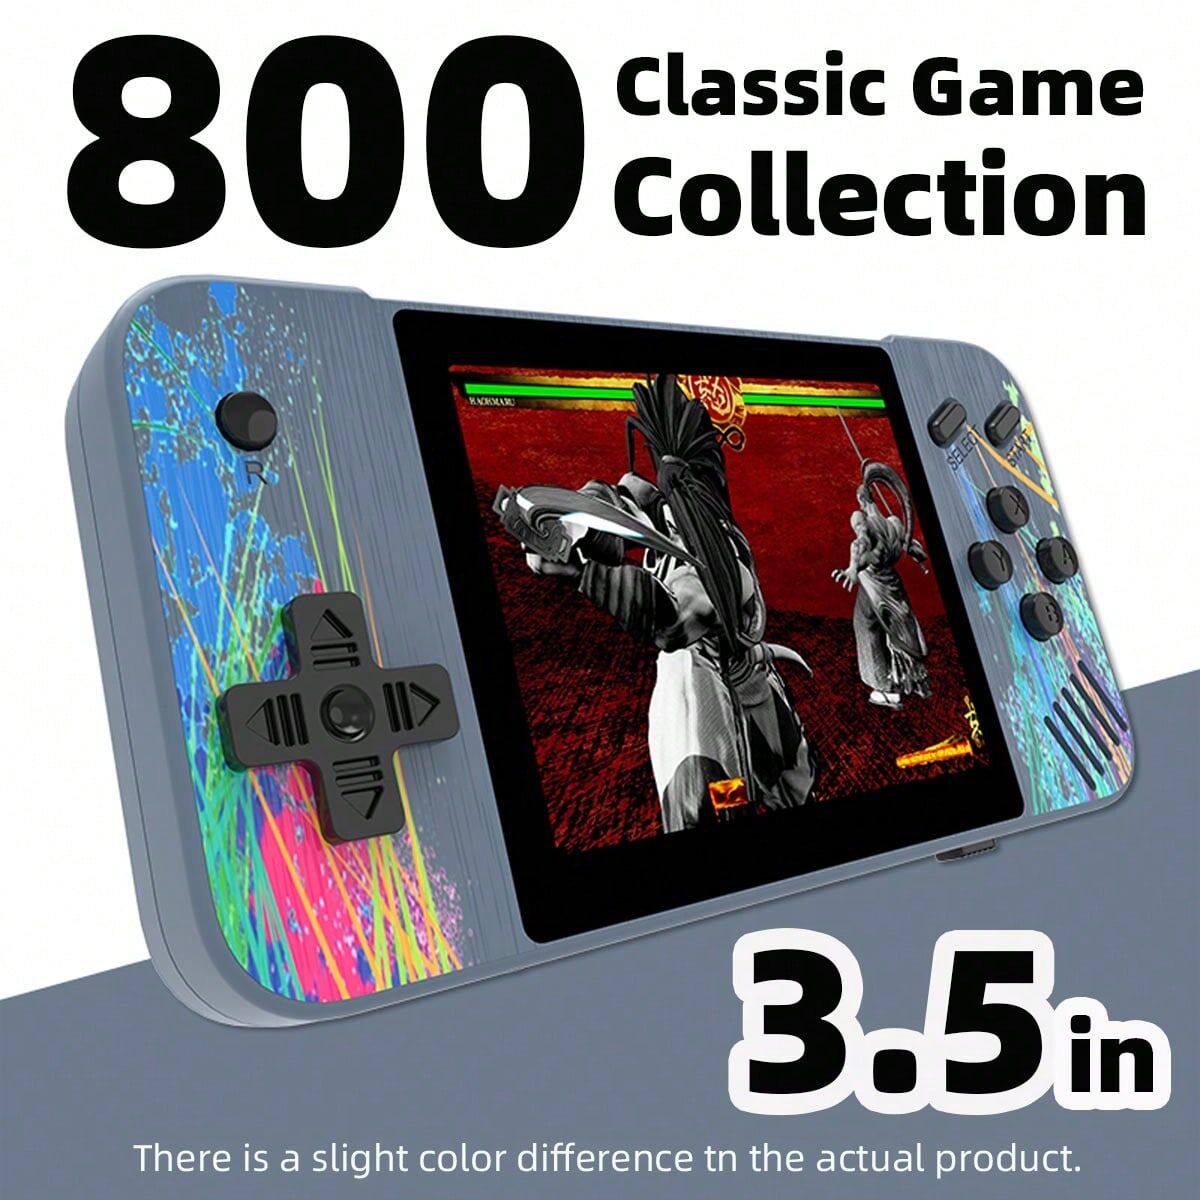 SHEIN A Game Console With 800 Games, Large Screen Double Players Battle Machine, Retro Nostalgic Classic Tetris Game Console, Handheld Mini Console Bringing Back Your Childhood Memories Grey one-size